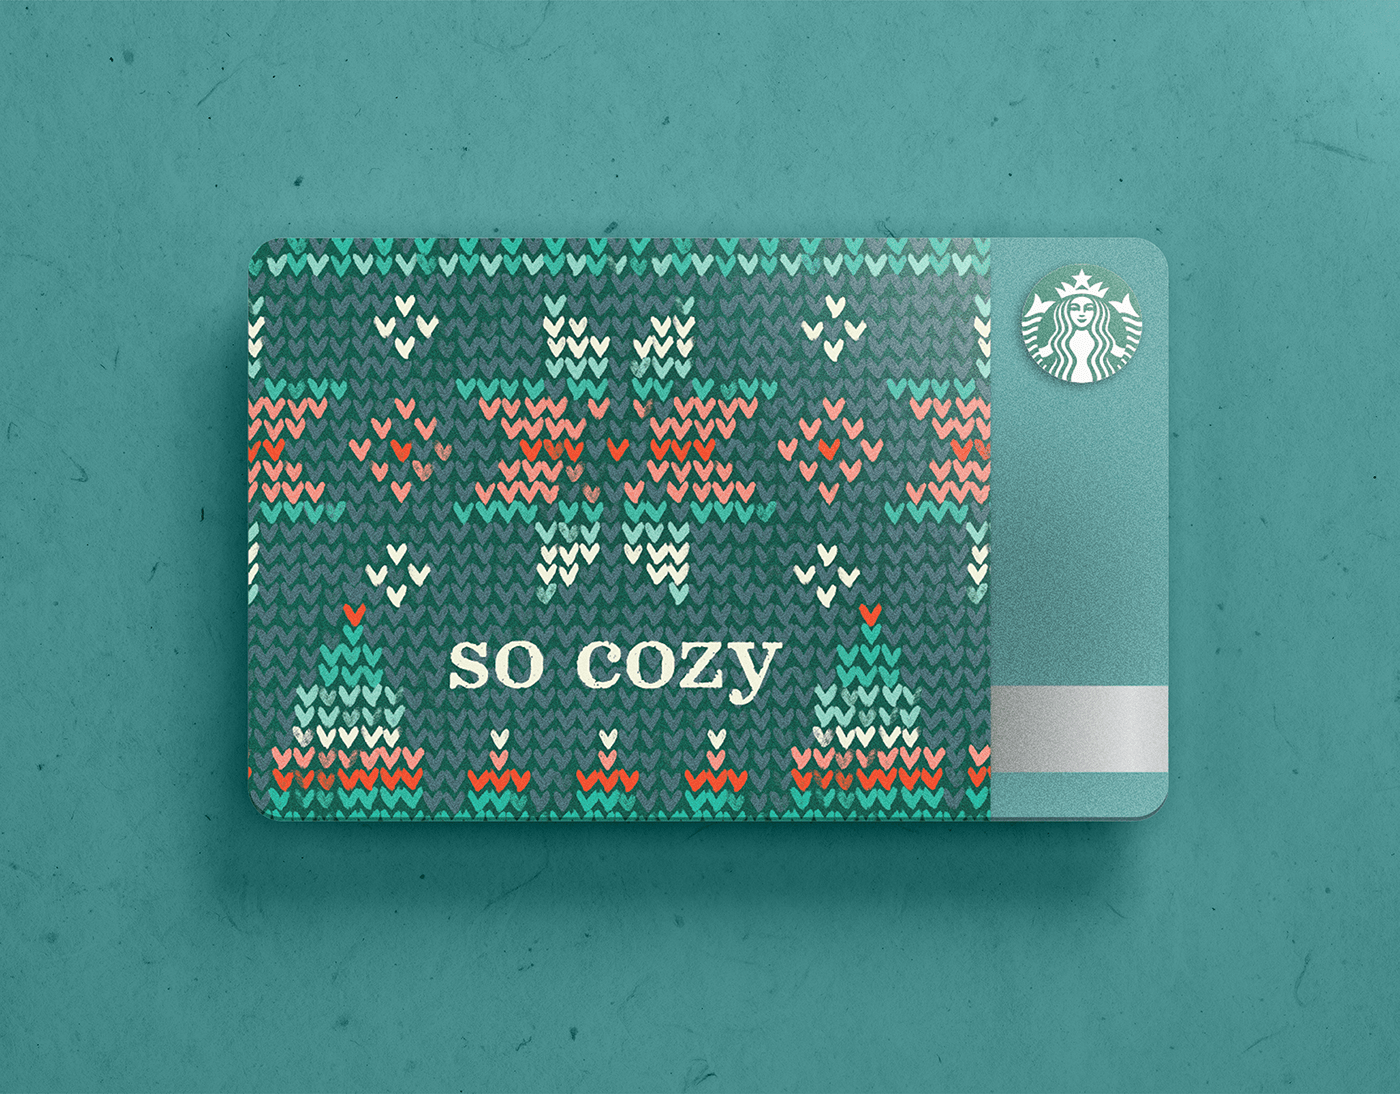 starbucks holiday christmas coffee gift card design and illustration mockup by chelsea wirtz studio 